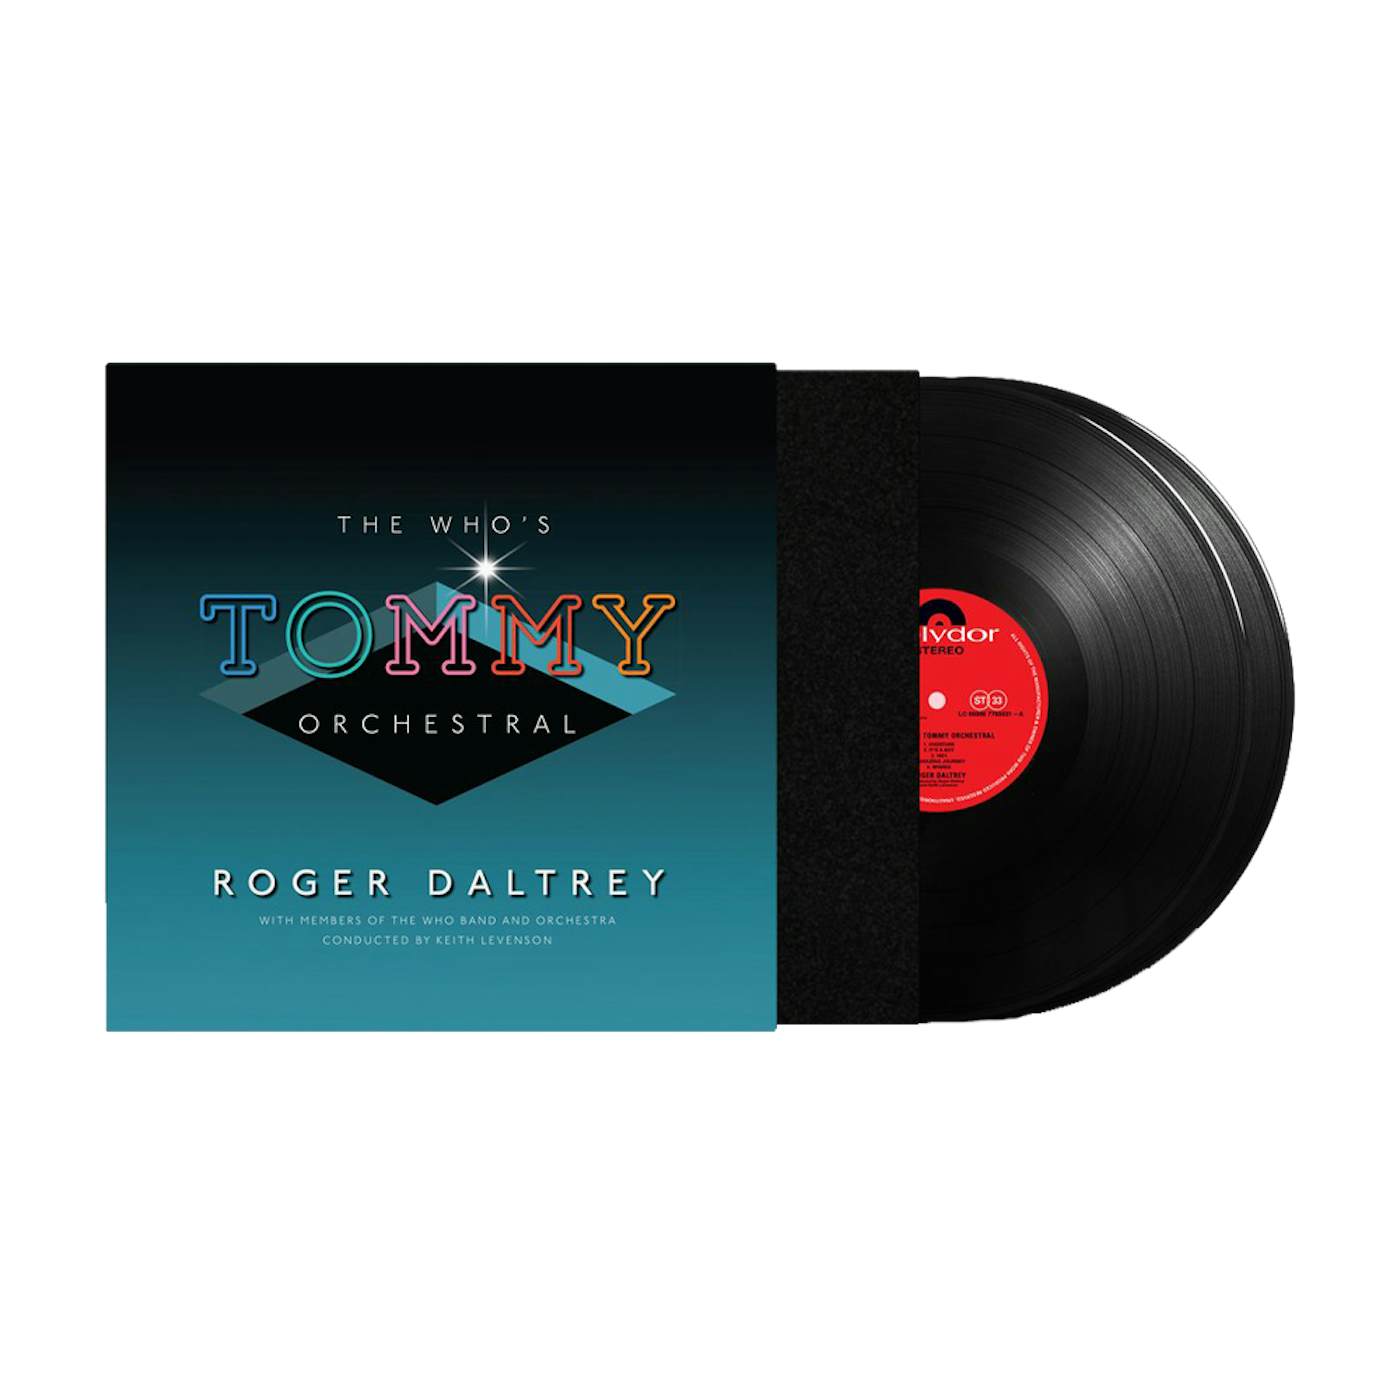 Roger Daltrey The Who's Tommy Orchestral 2LP (Vinyl)